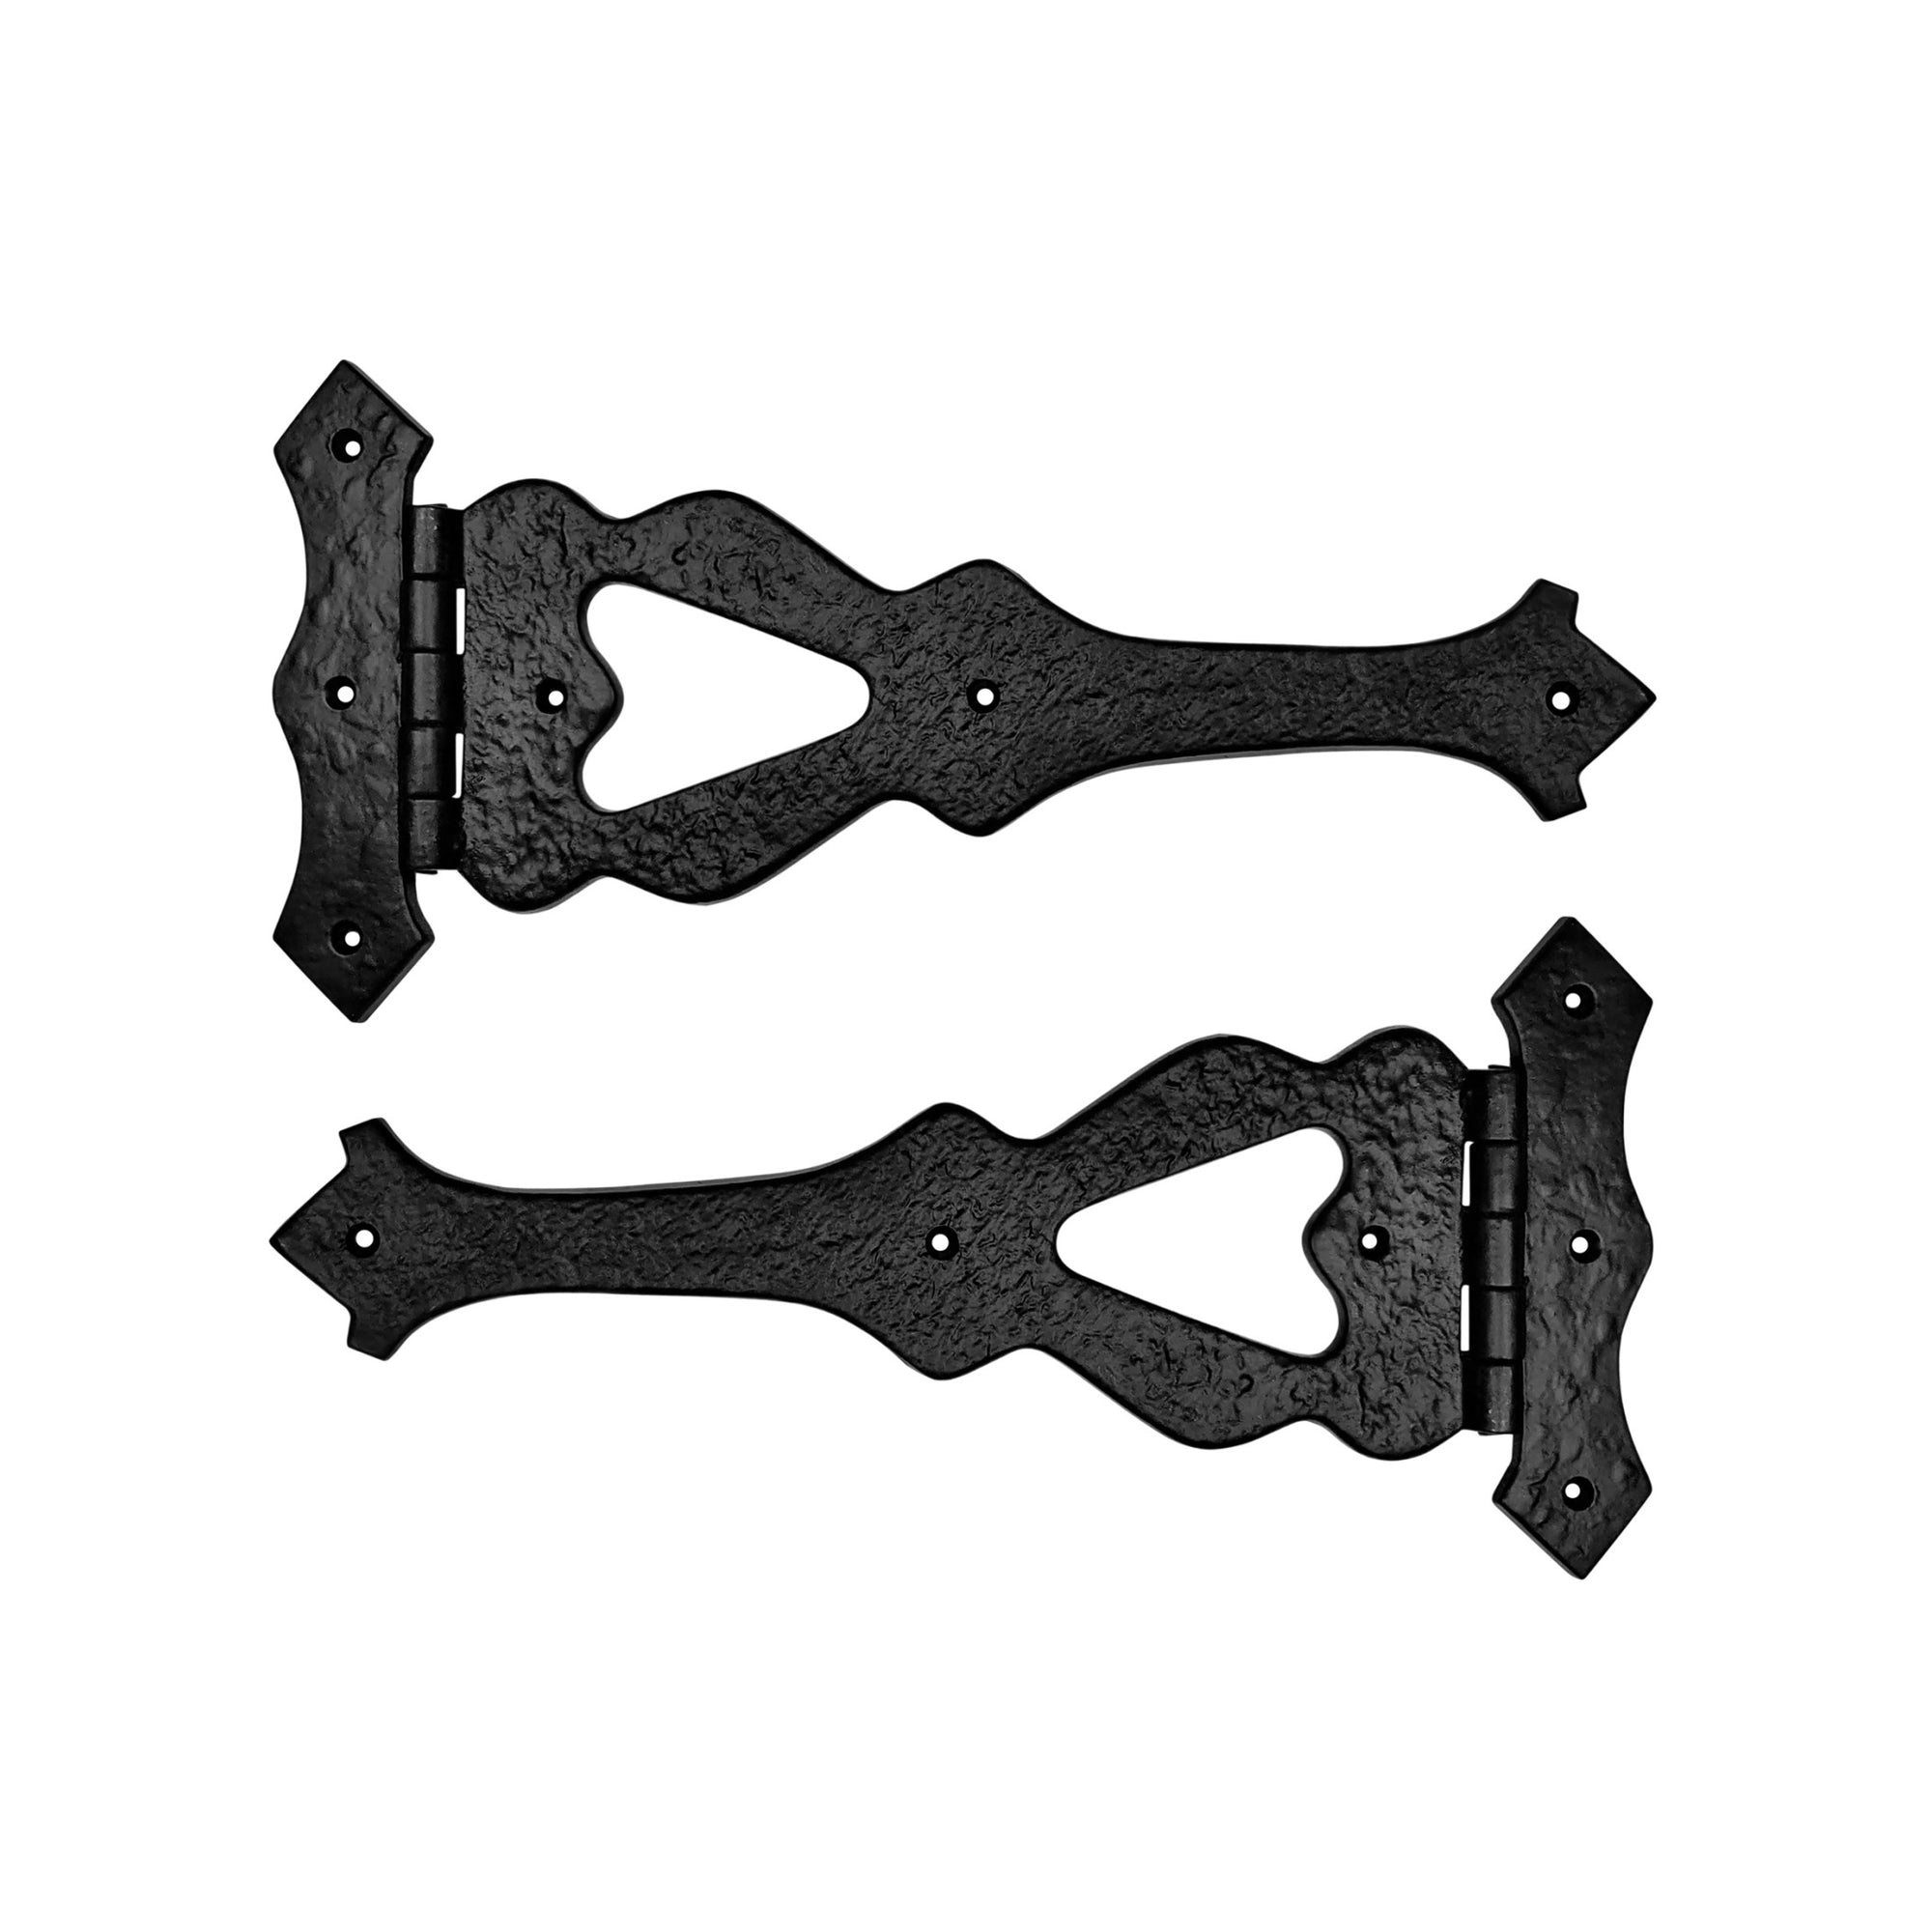 Black Antique Iron T Hinge Set - 2 Piece Gate Hinges for Wooden and Metal Fences, Doors, Cabinets - Black Powder Coated Finish